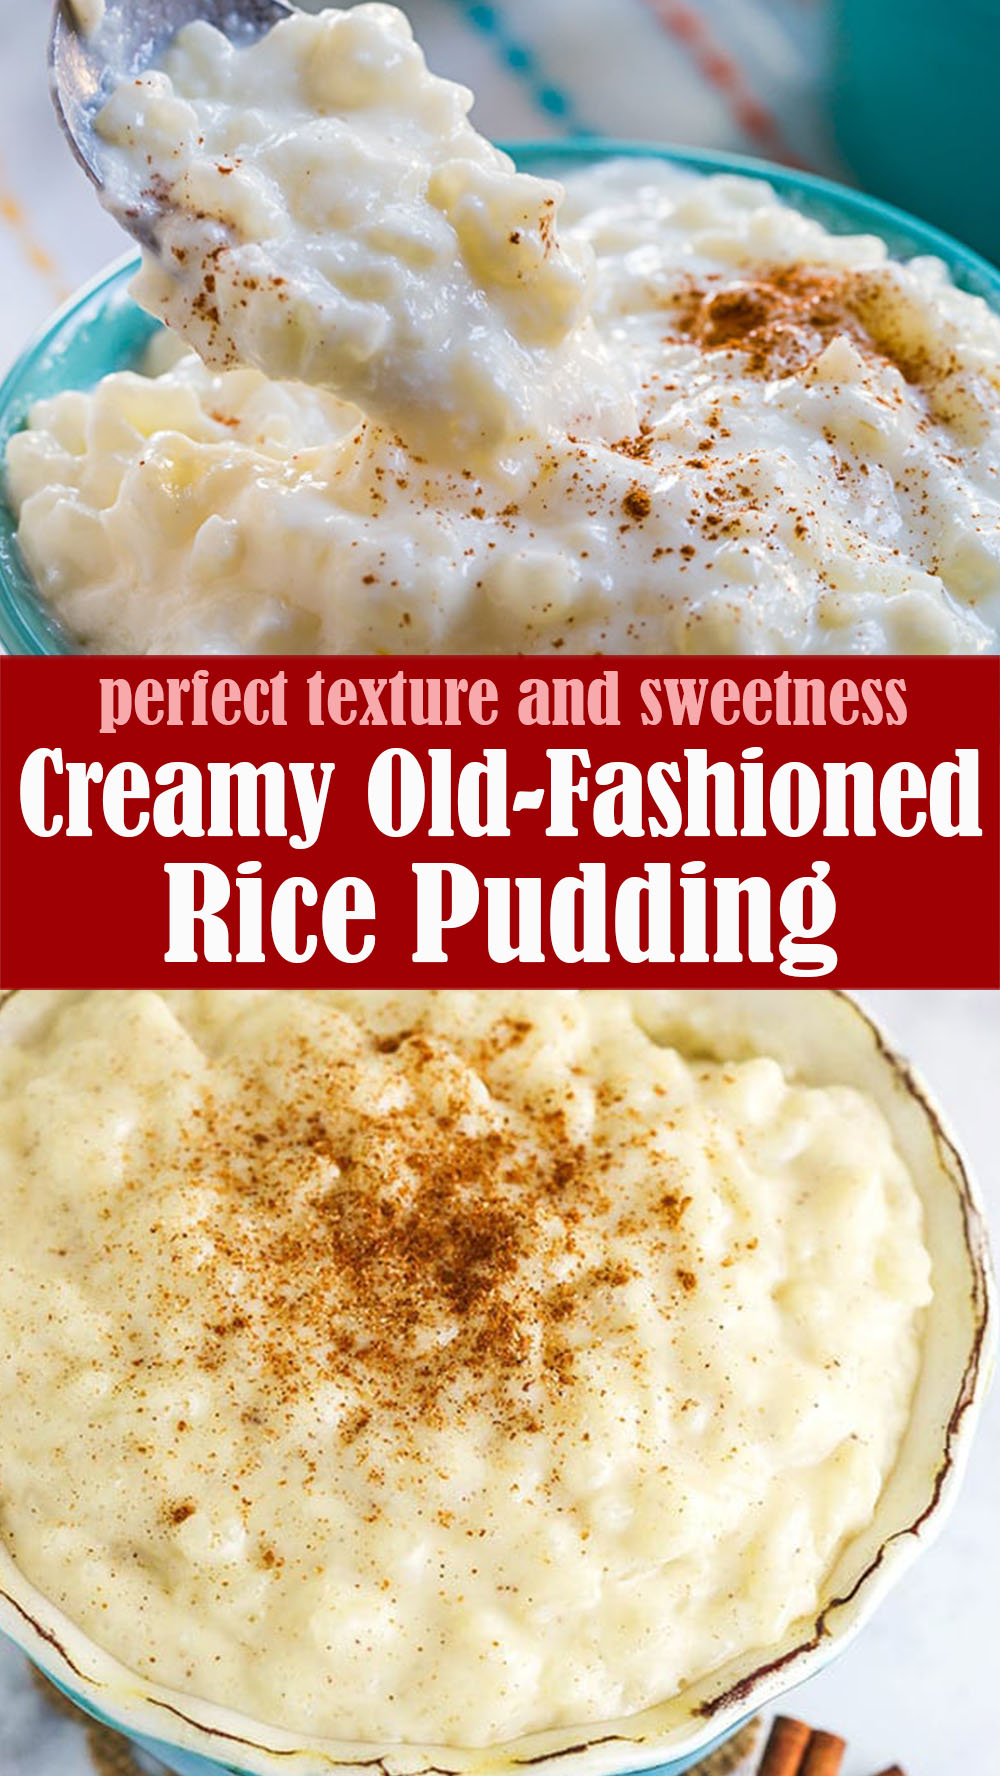 Creamy Old-Fashioned Rice Pudding